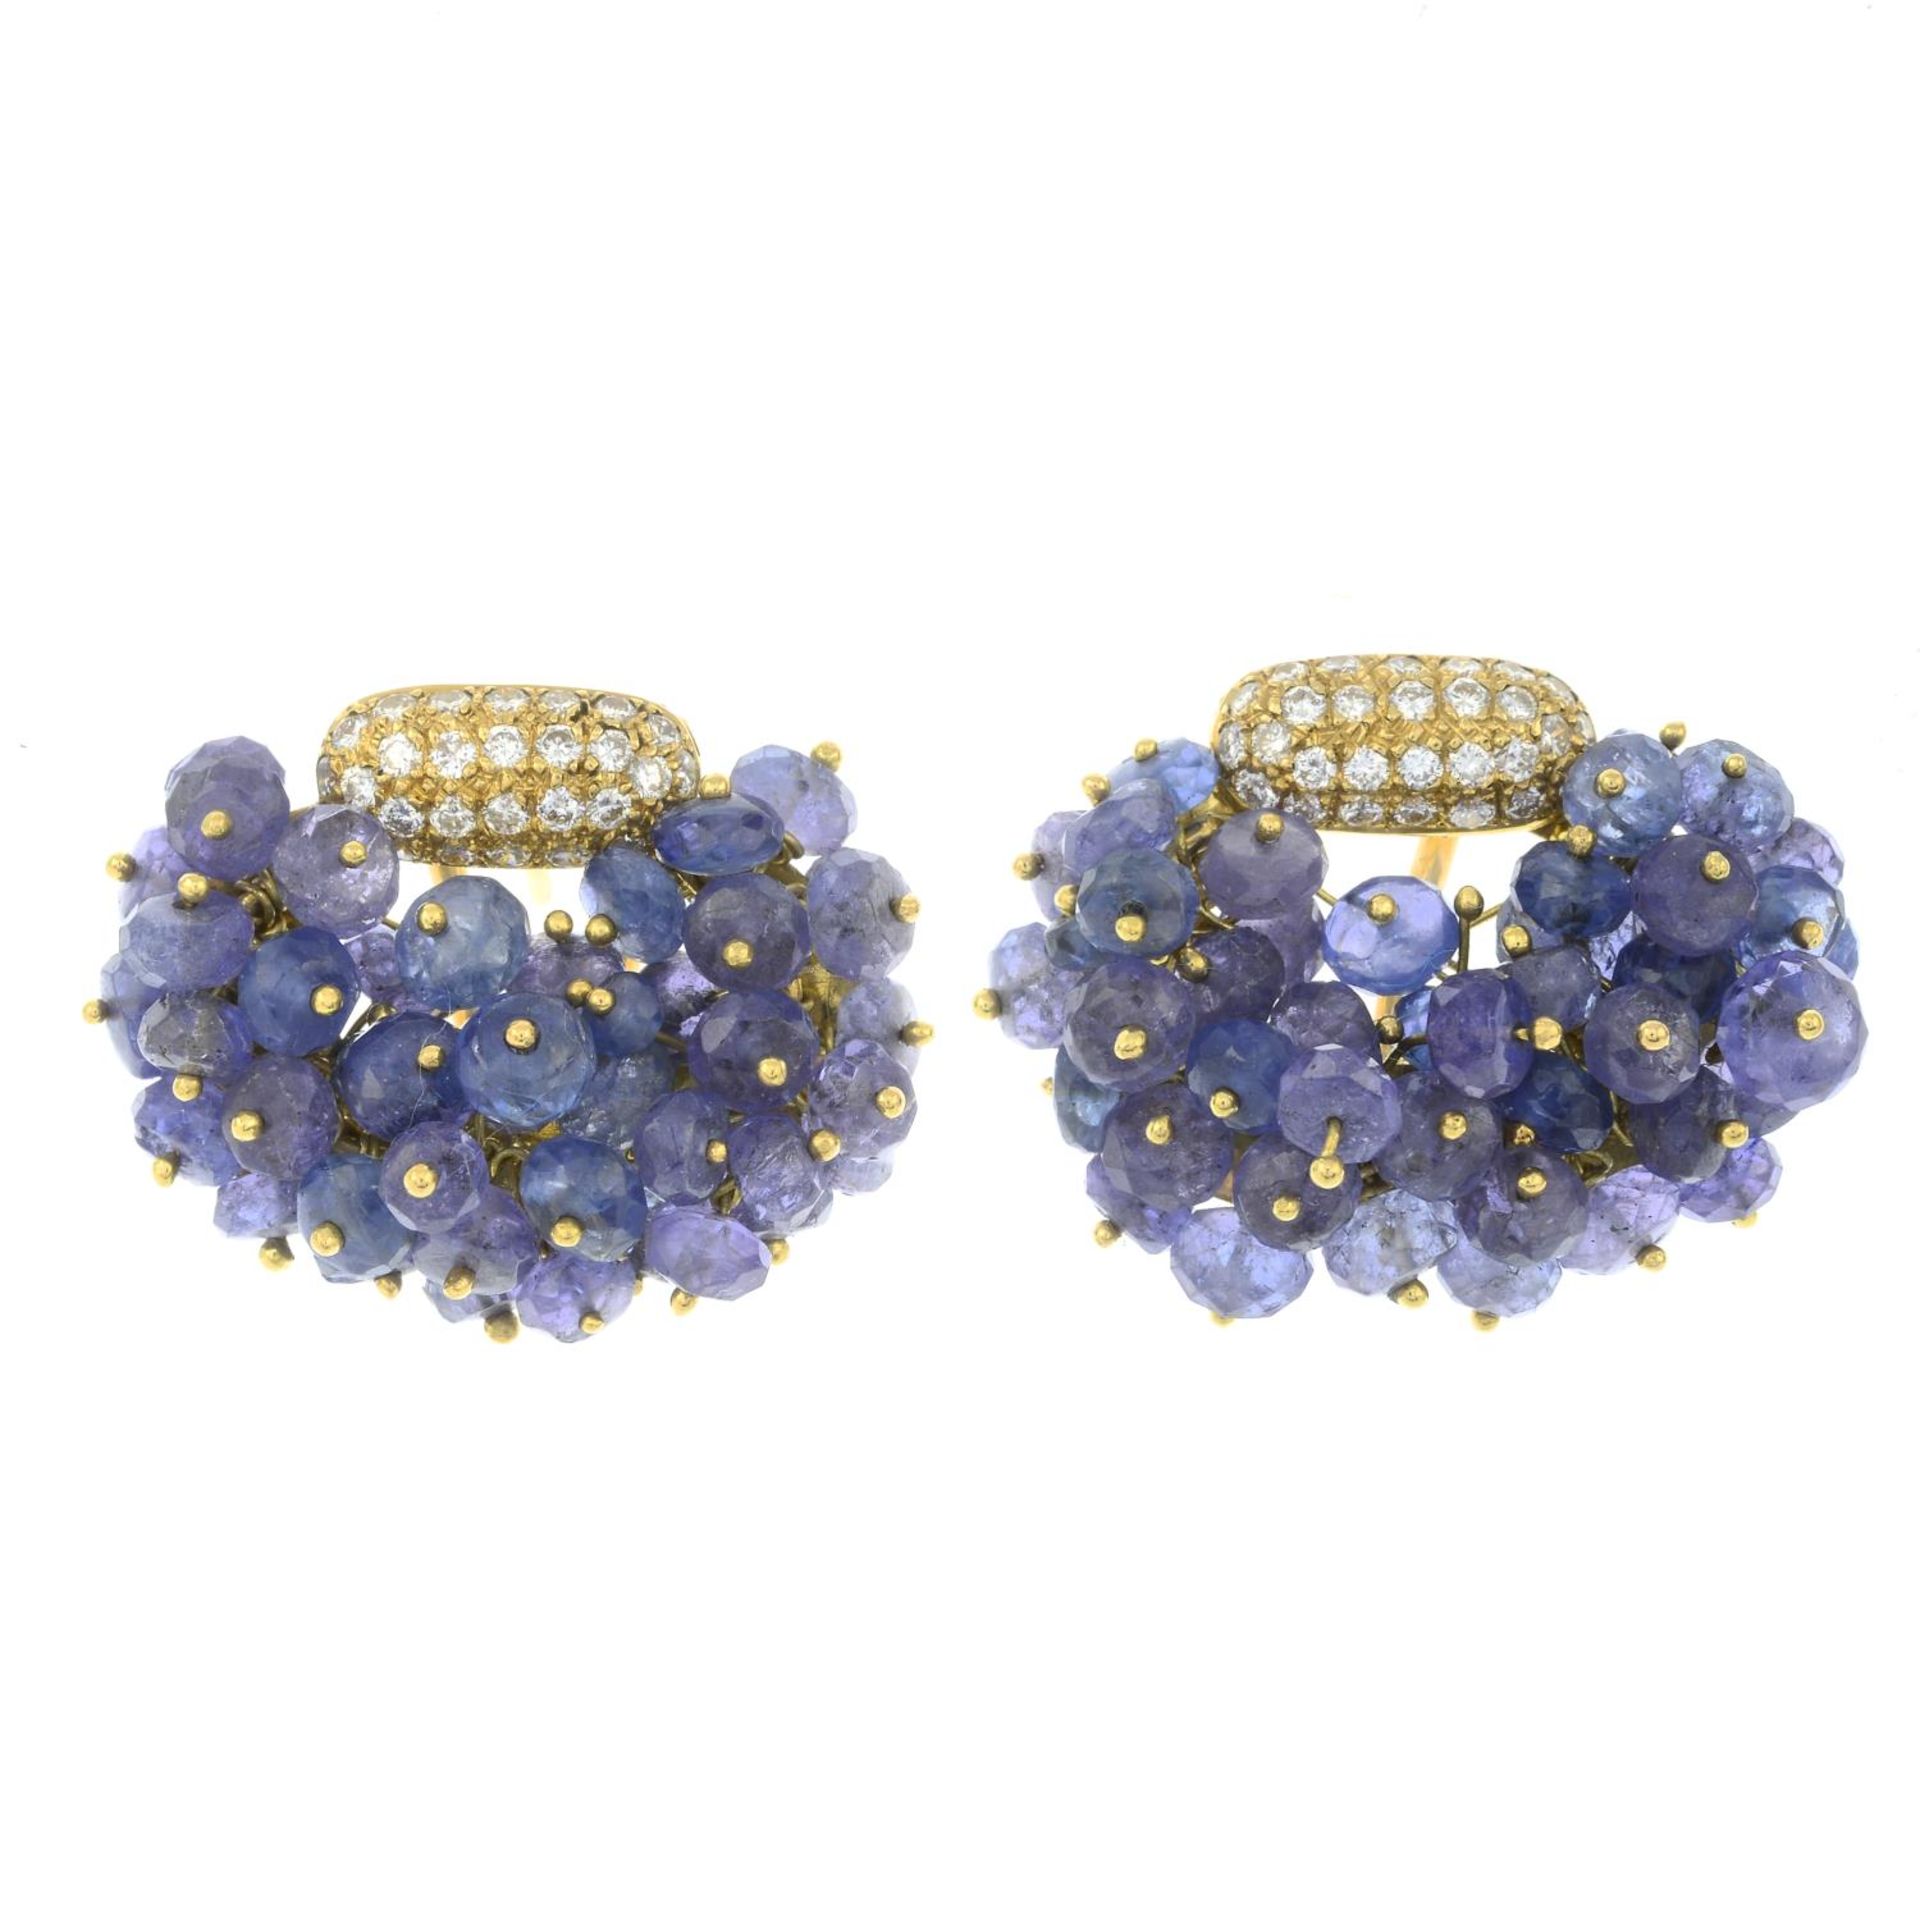 A pair of brilliant-cut diamond and sapphire bead cluster earrings.